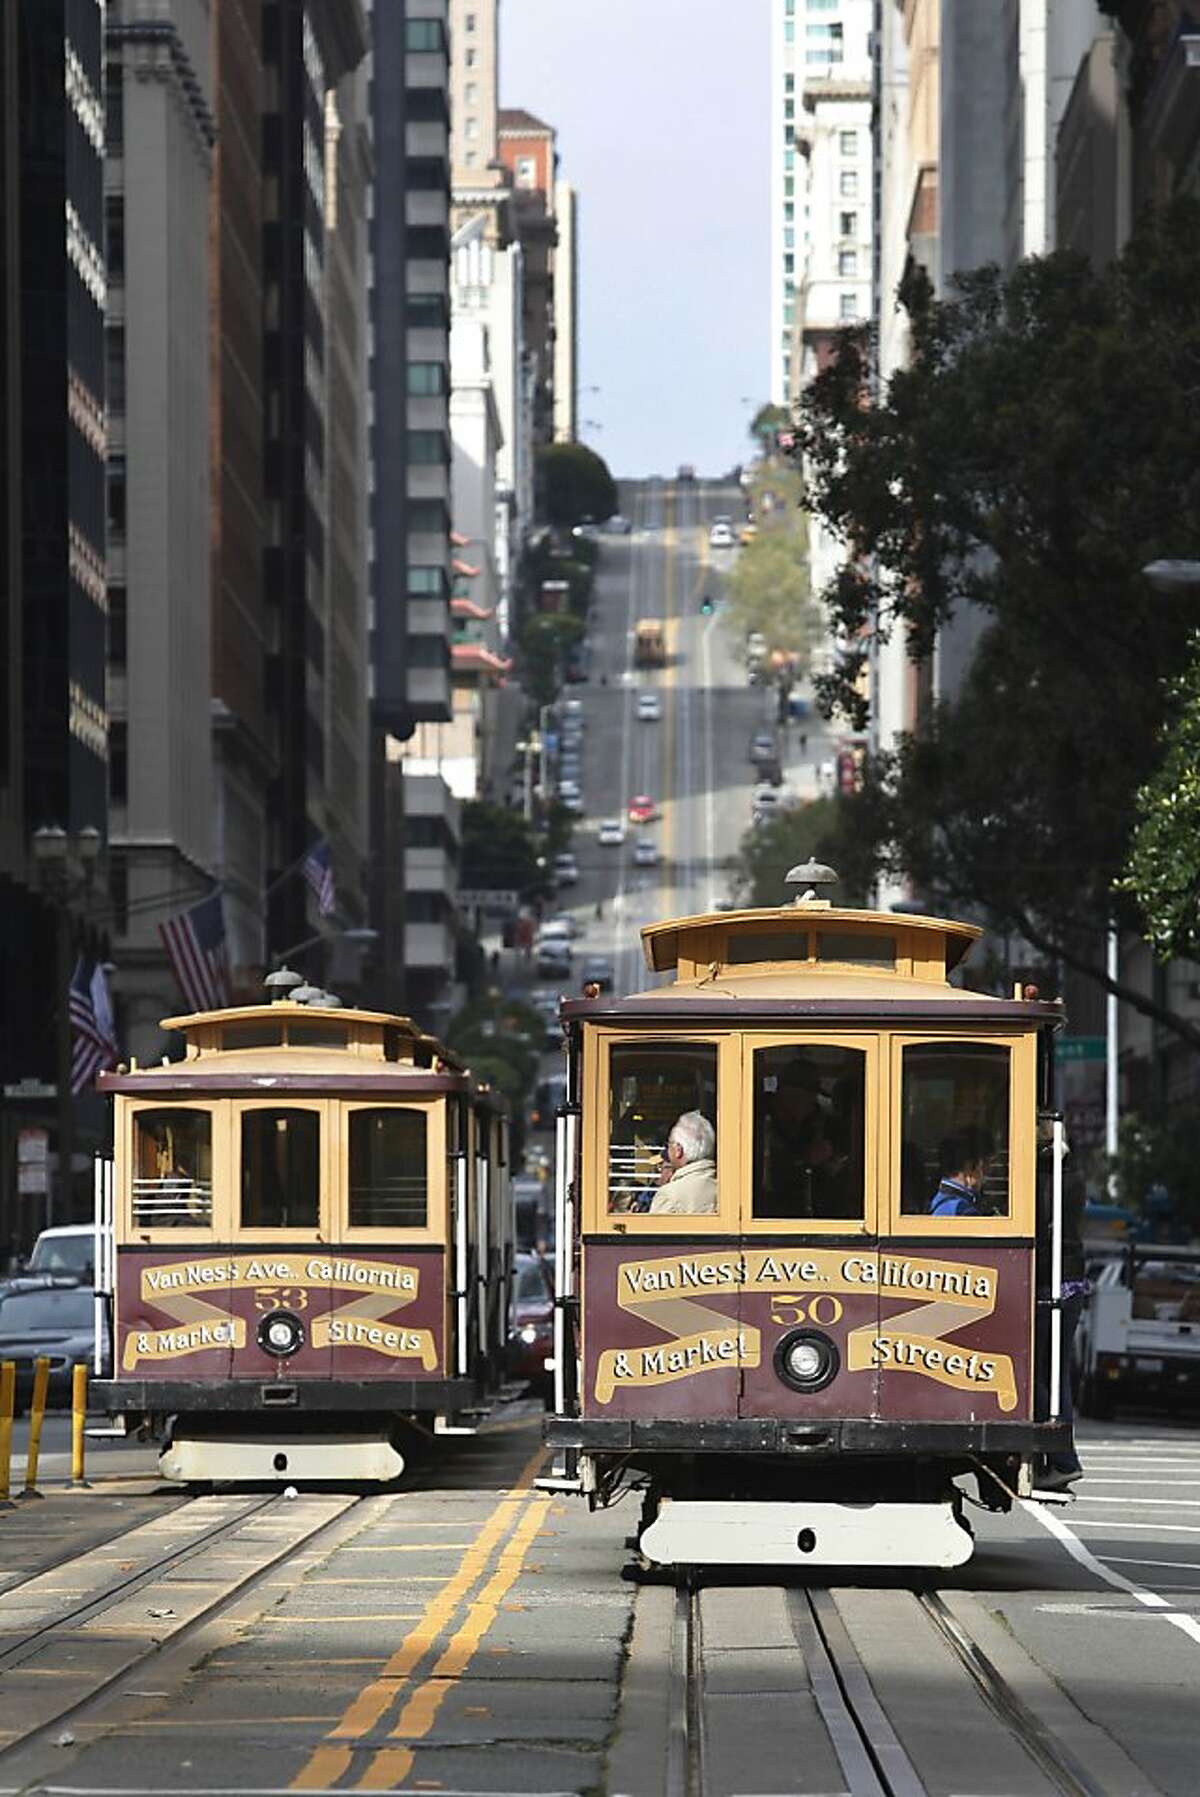 The San Francisco cable car California line moves along California street in San Francisco, Calif. on Wednesday, March 24, 2010. The California line will be closed beginning January 1 to July 1 for repairs and rebuilding funded through Measure K, the San Francisco transportation sales tax.